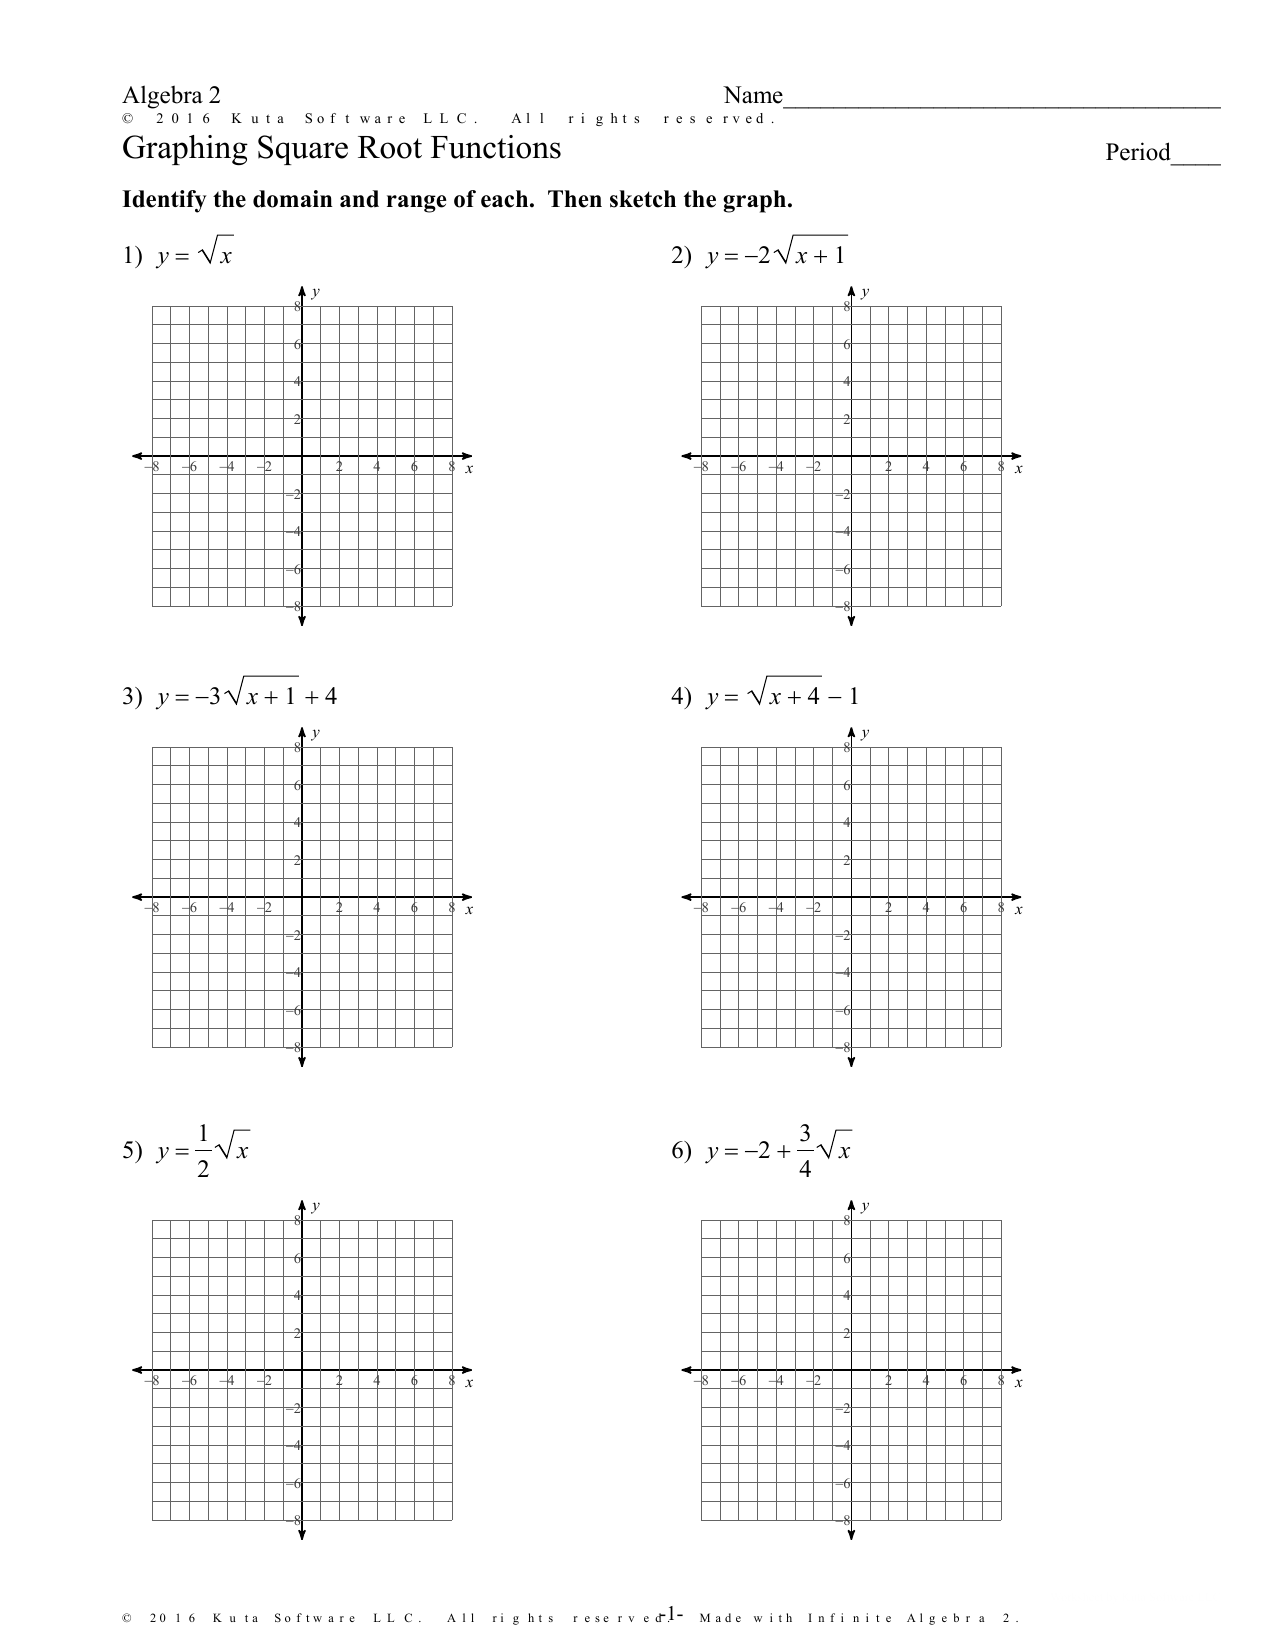 graphing-square-root-functions